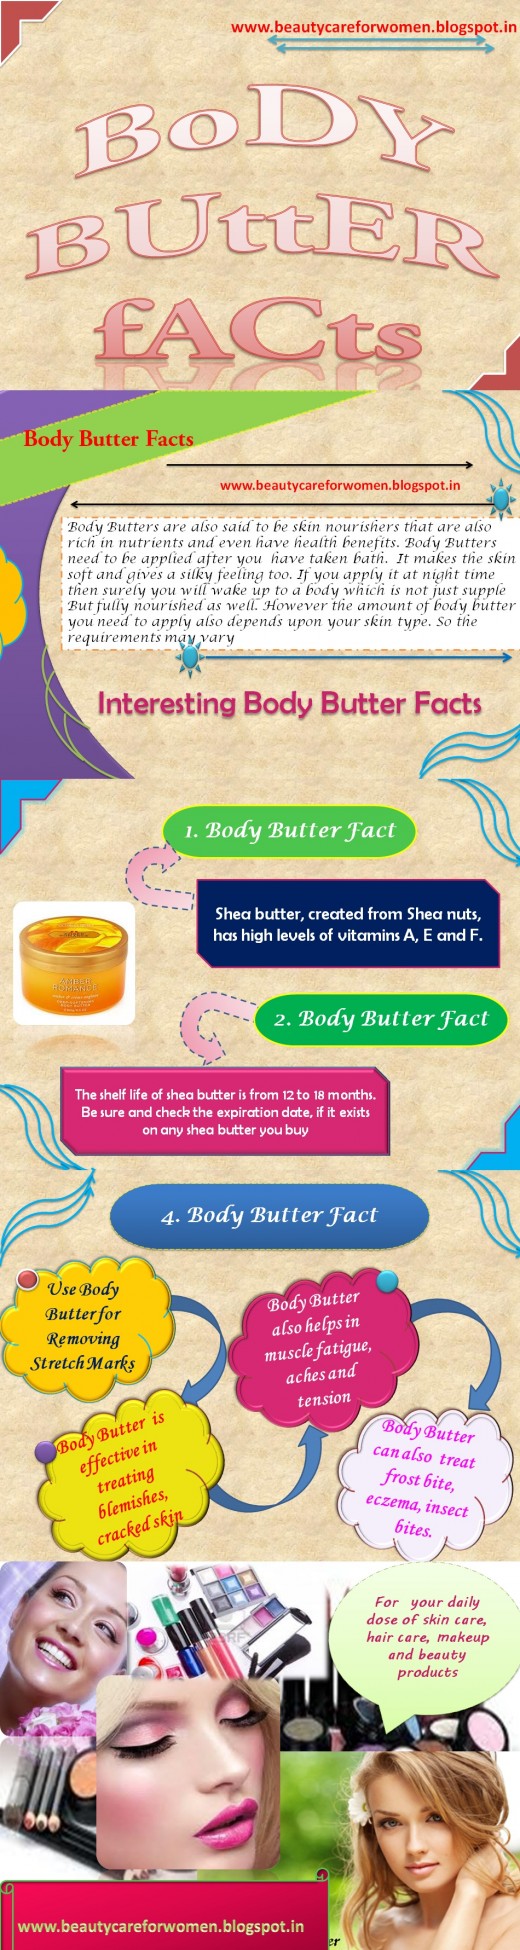 Body Butter Facts